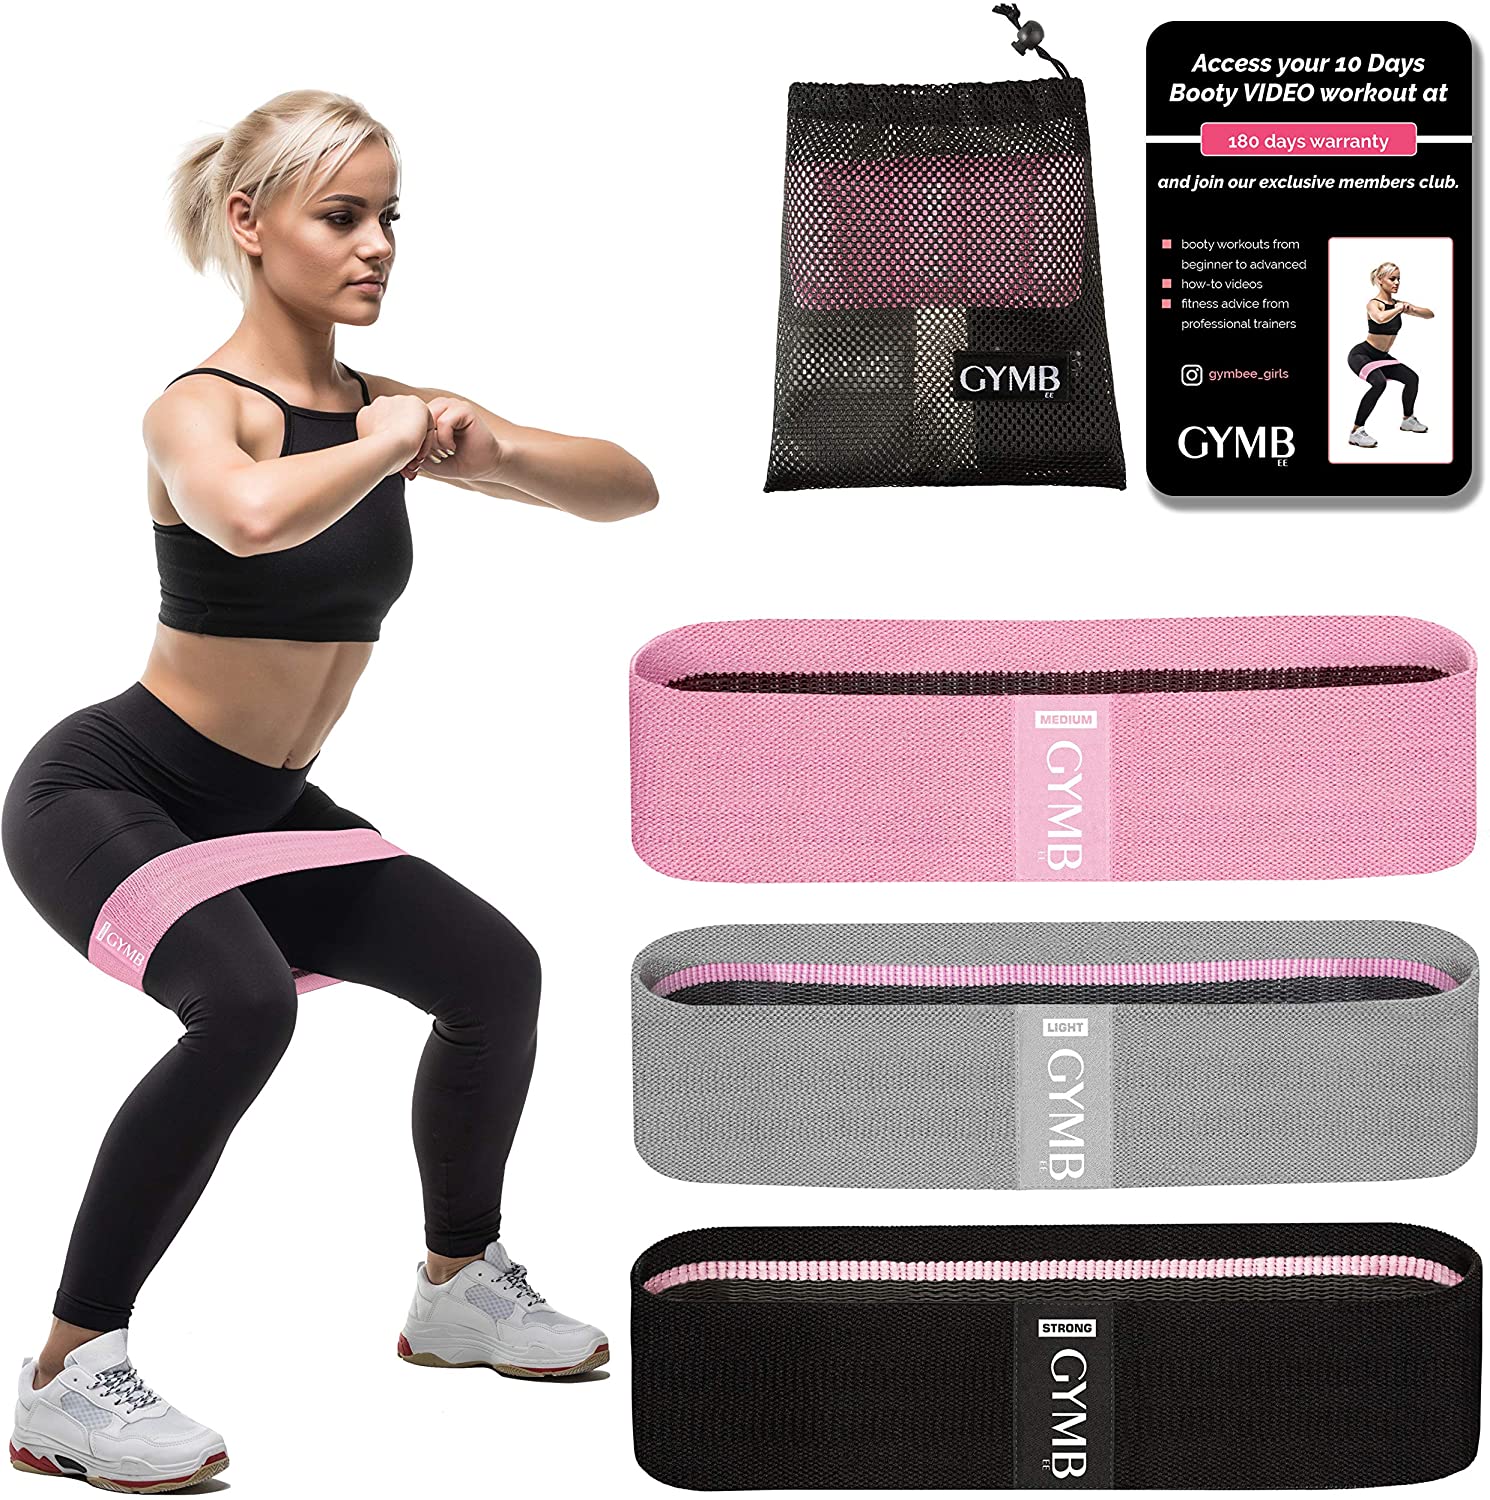 Exercise Workout Bands For Legs And Butt Peach Bands Resistance Bands Set 